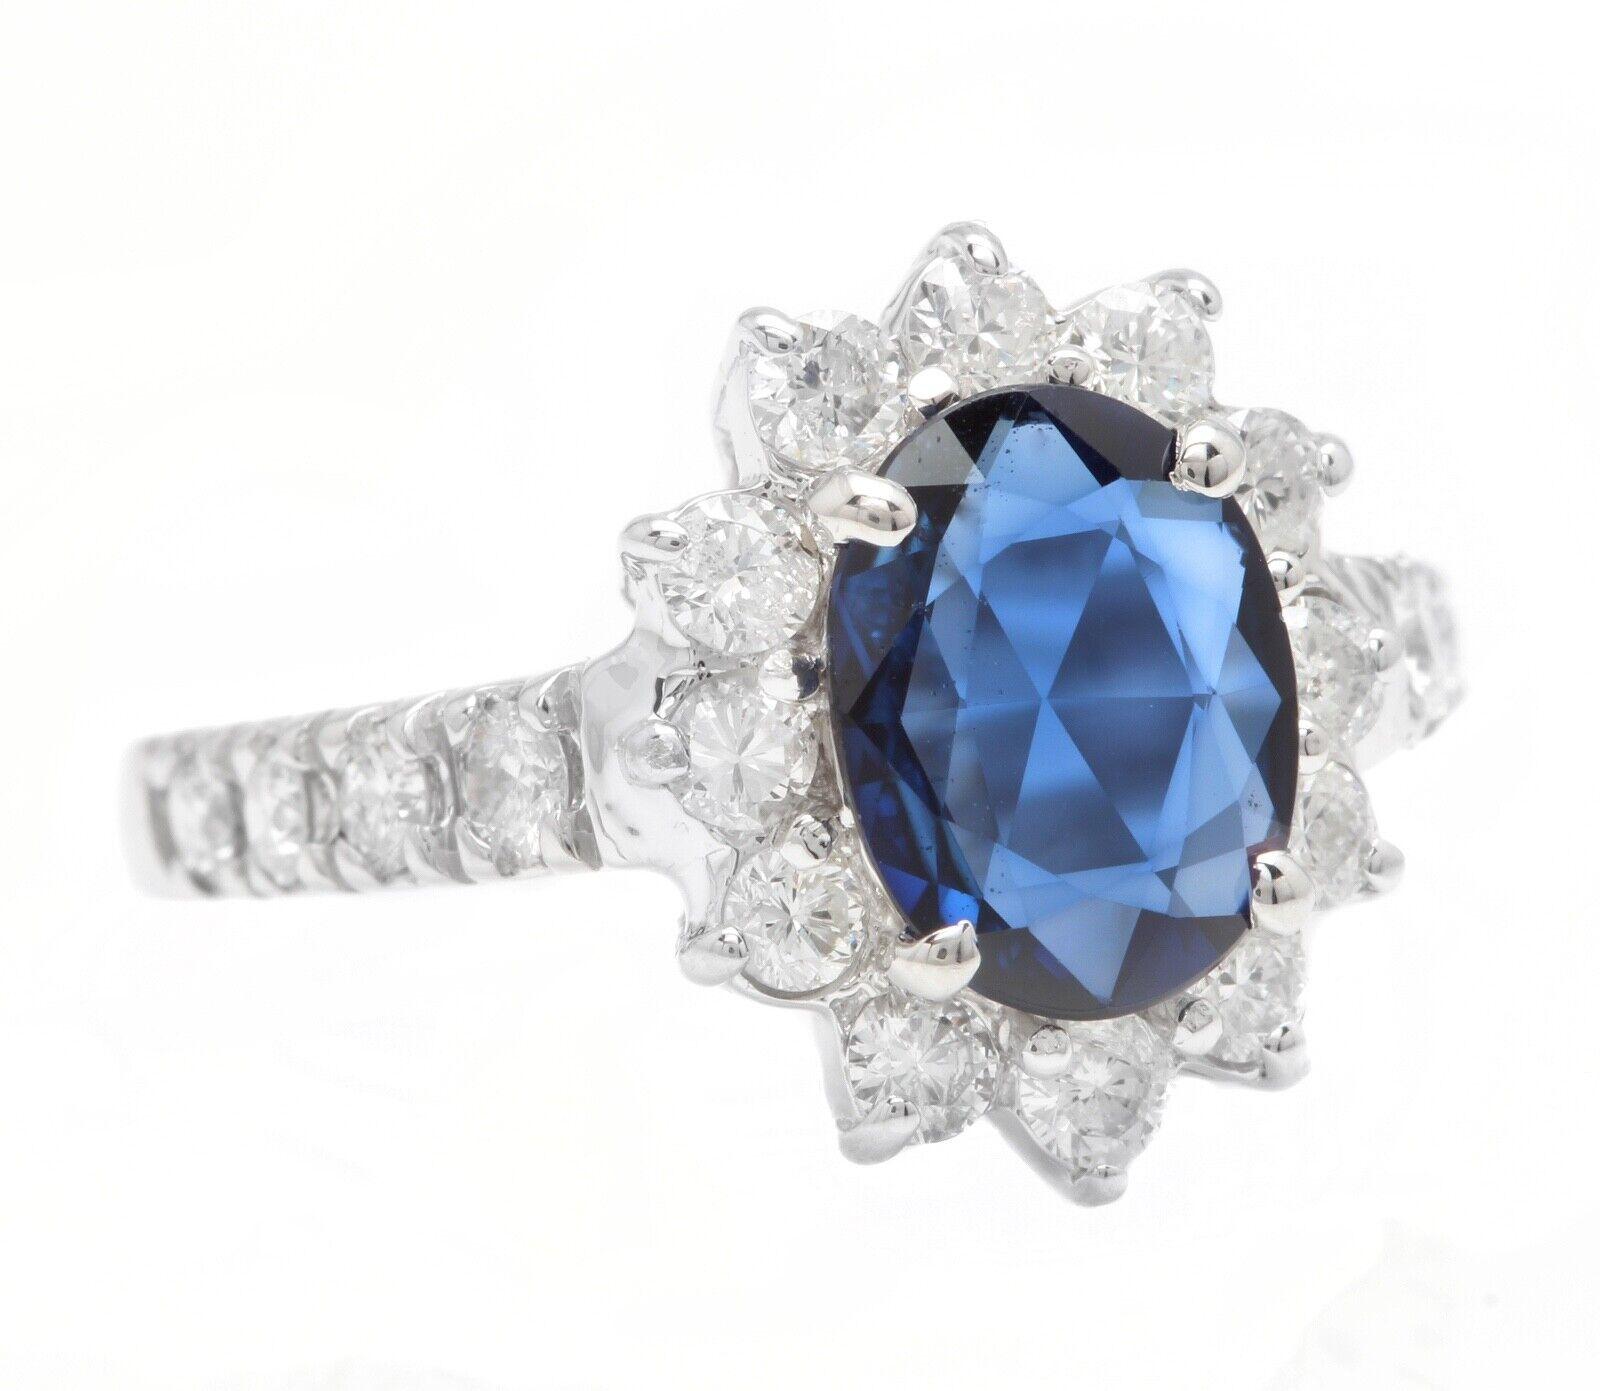 3.00 Carats Exquisite Natural Blue Sapphire and Diamond 14K Solid White Gold Ring

Suggested Replacement Value $5,000.00

Total Blue Sapphire Weight is: 2.35 Carats (Diffused)

Sapphire Measures: 9.00 x 7.00mm

Natural Round Diamonds Weight: 0.65